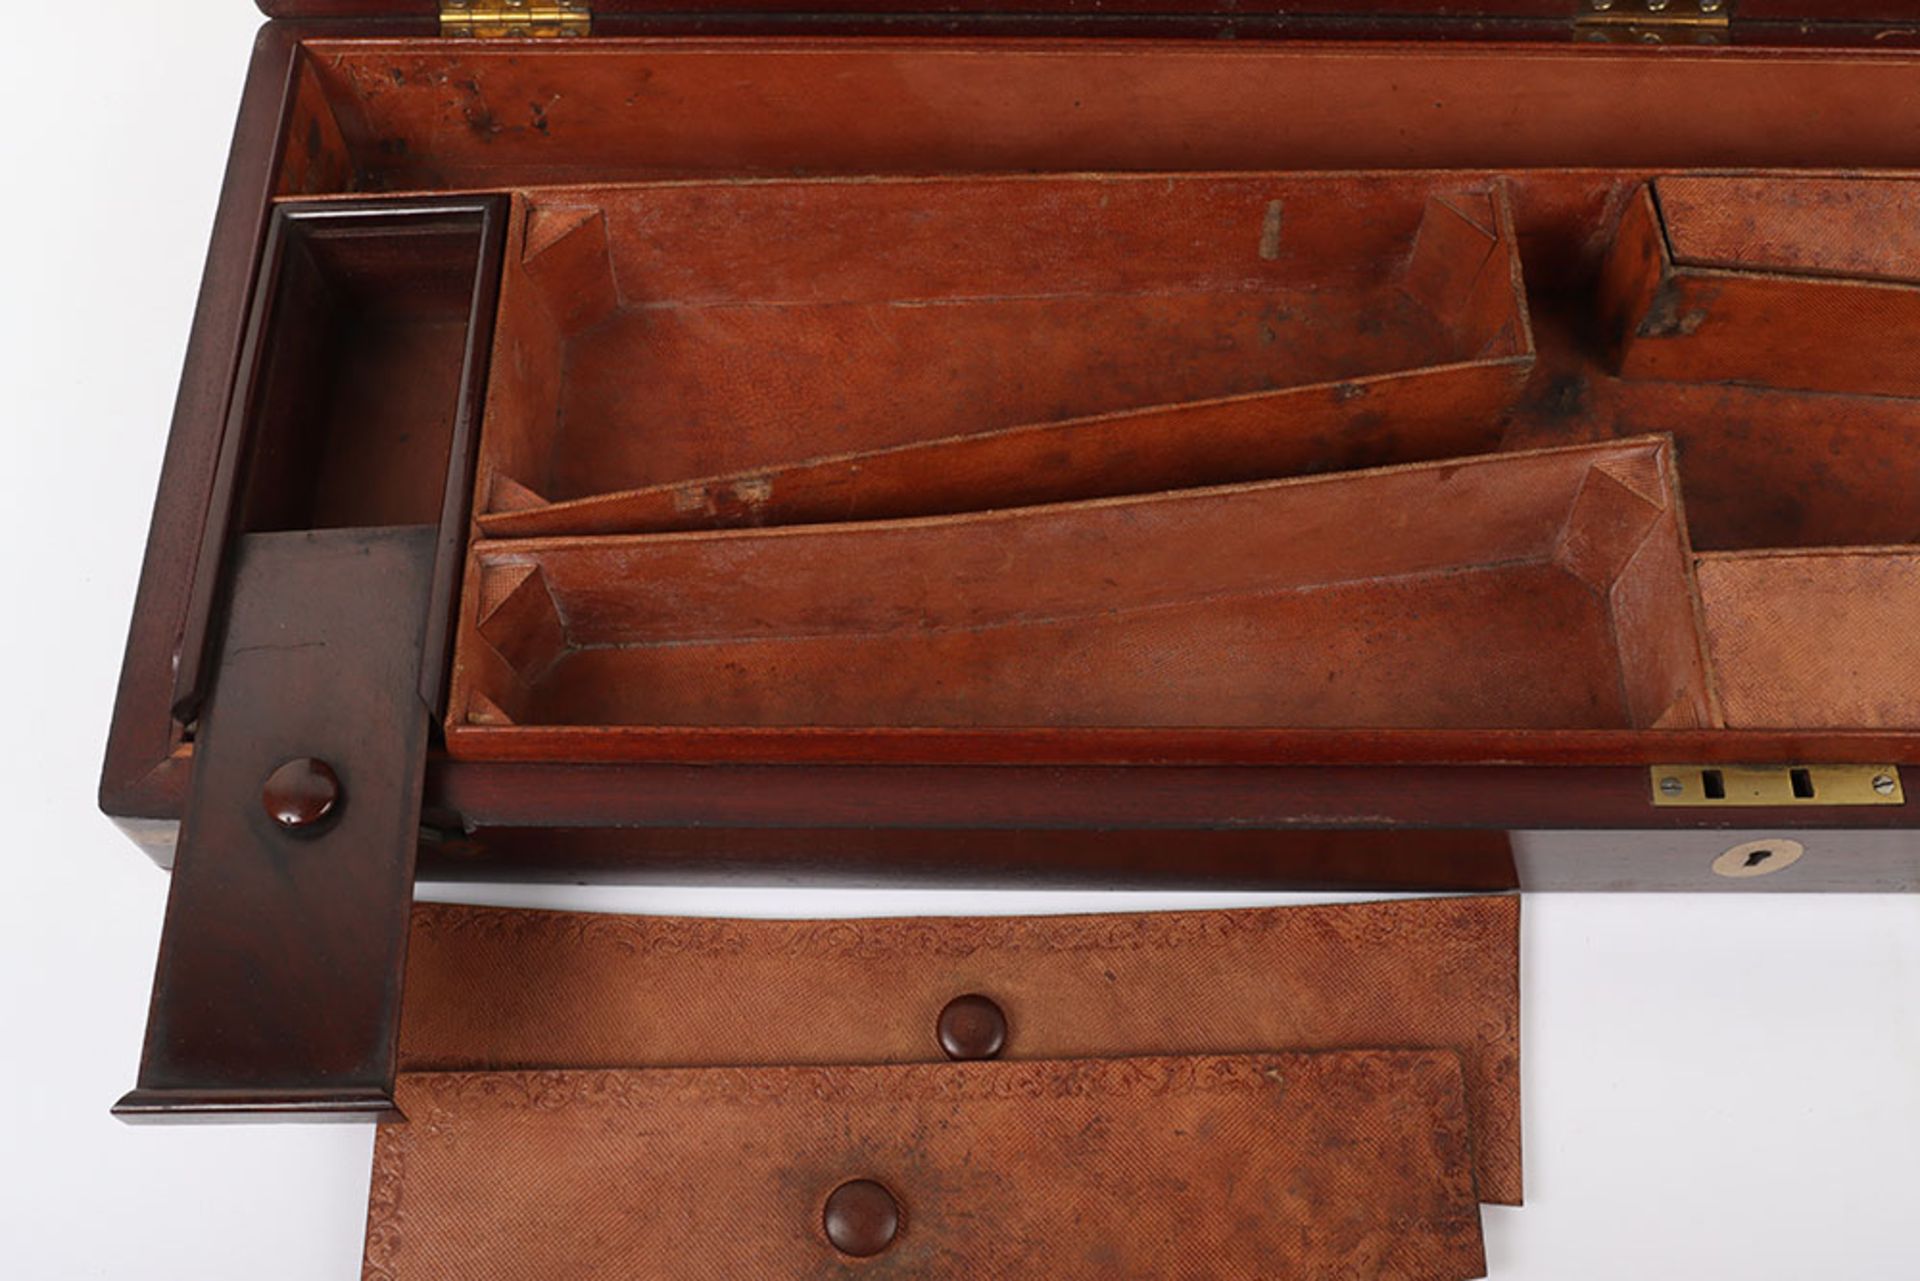 Good Brass Bound Mahogany Gun Case for a Double Barrel Percussion Gun or Rifle - Image 3 of 10